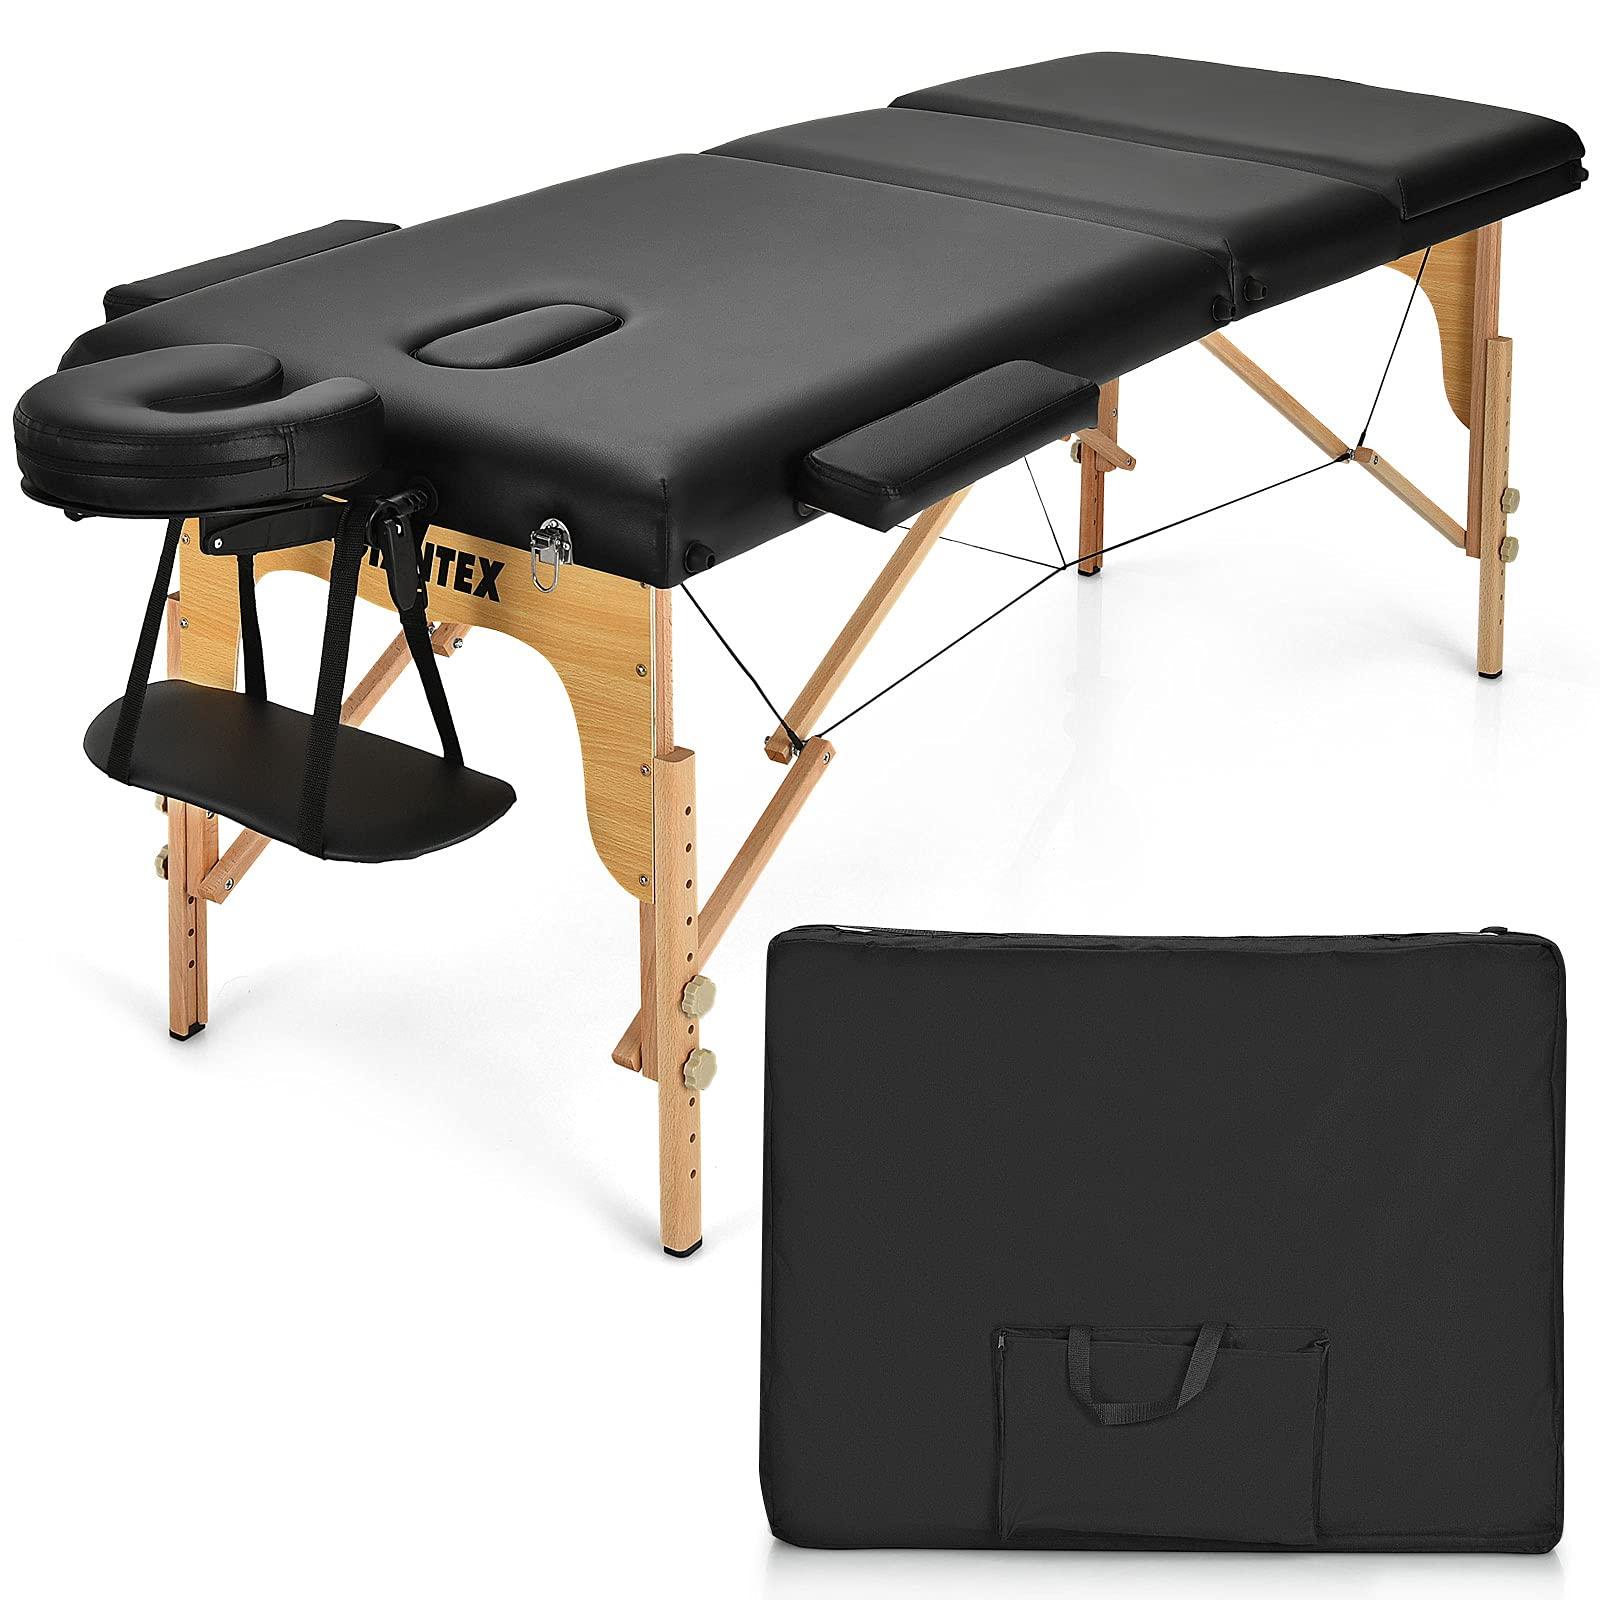 Giantex 84inch Folding Massage Table Spa Bed